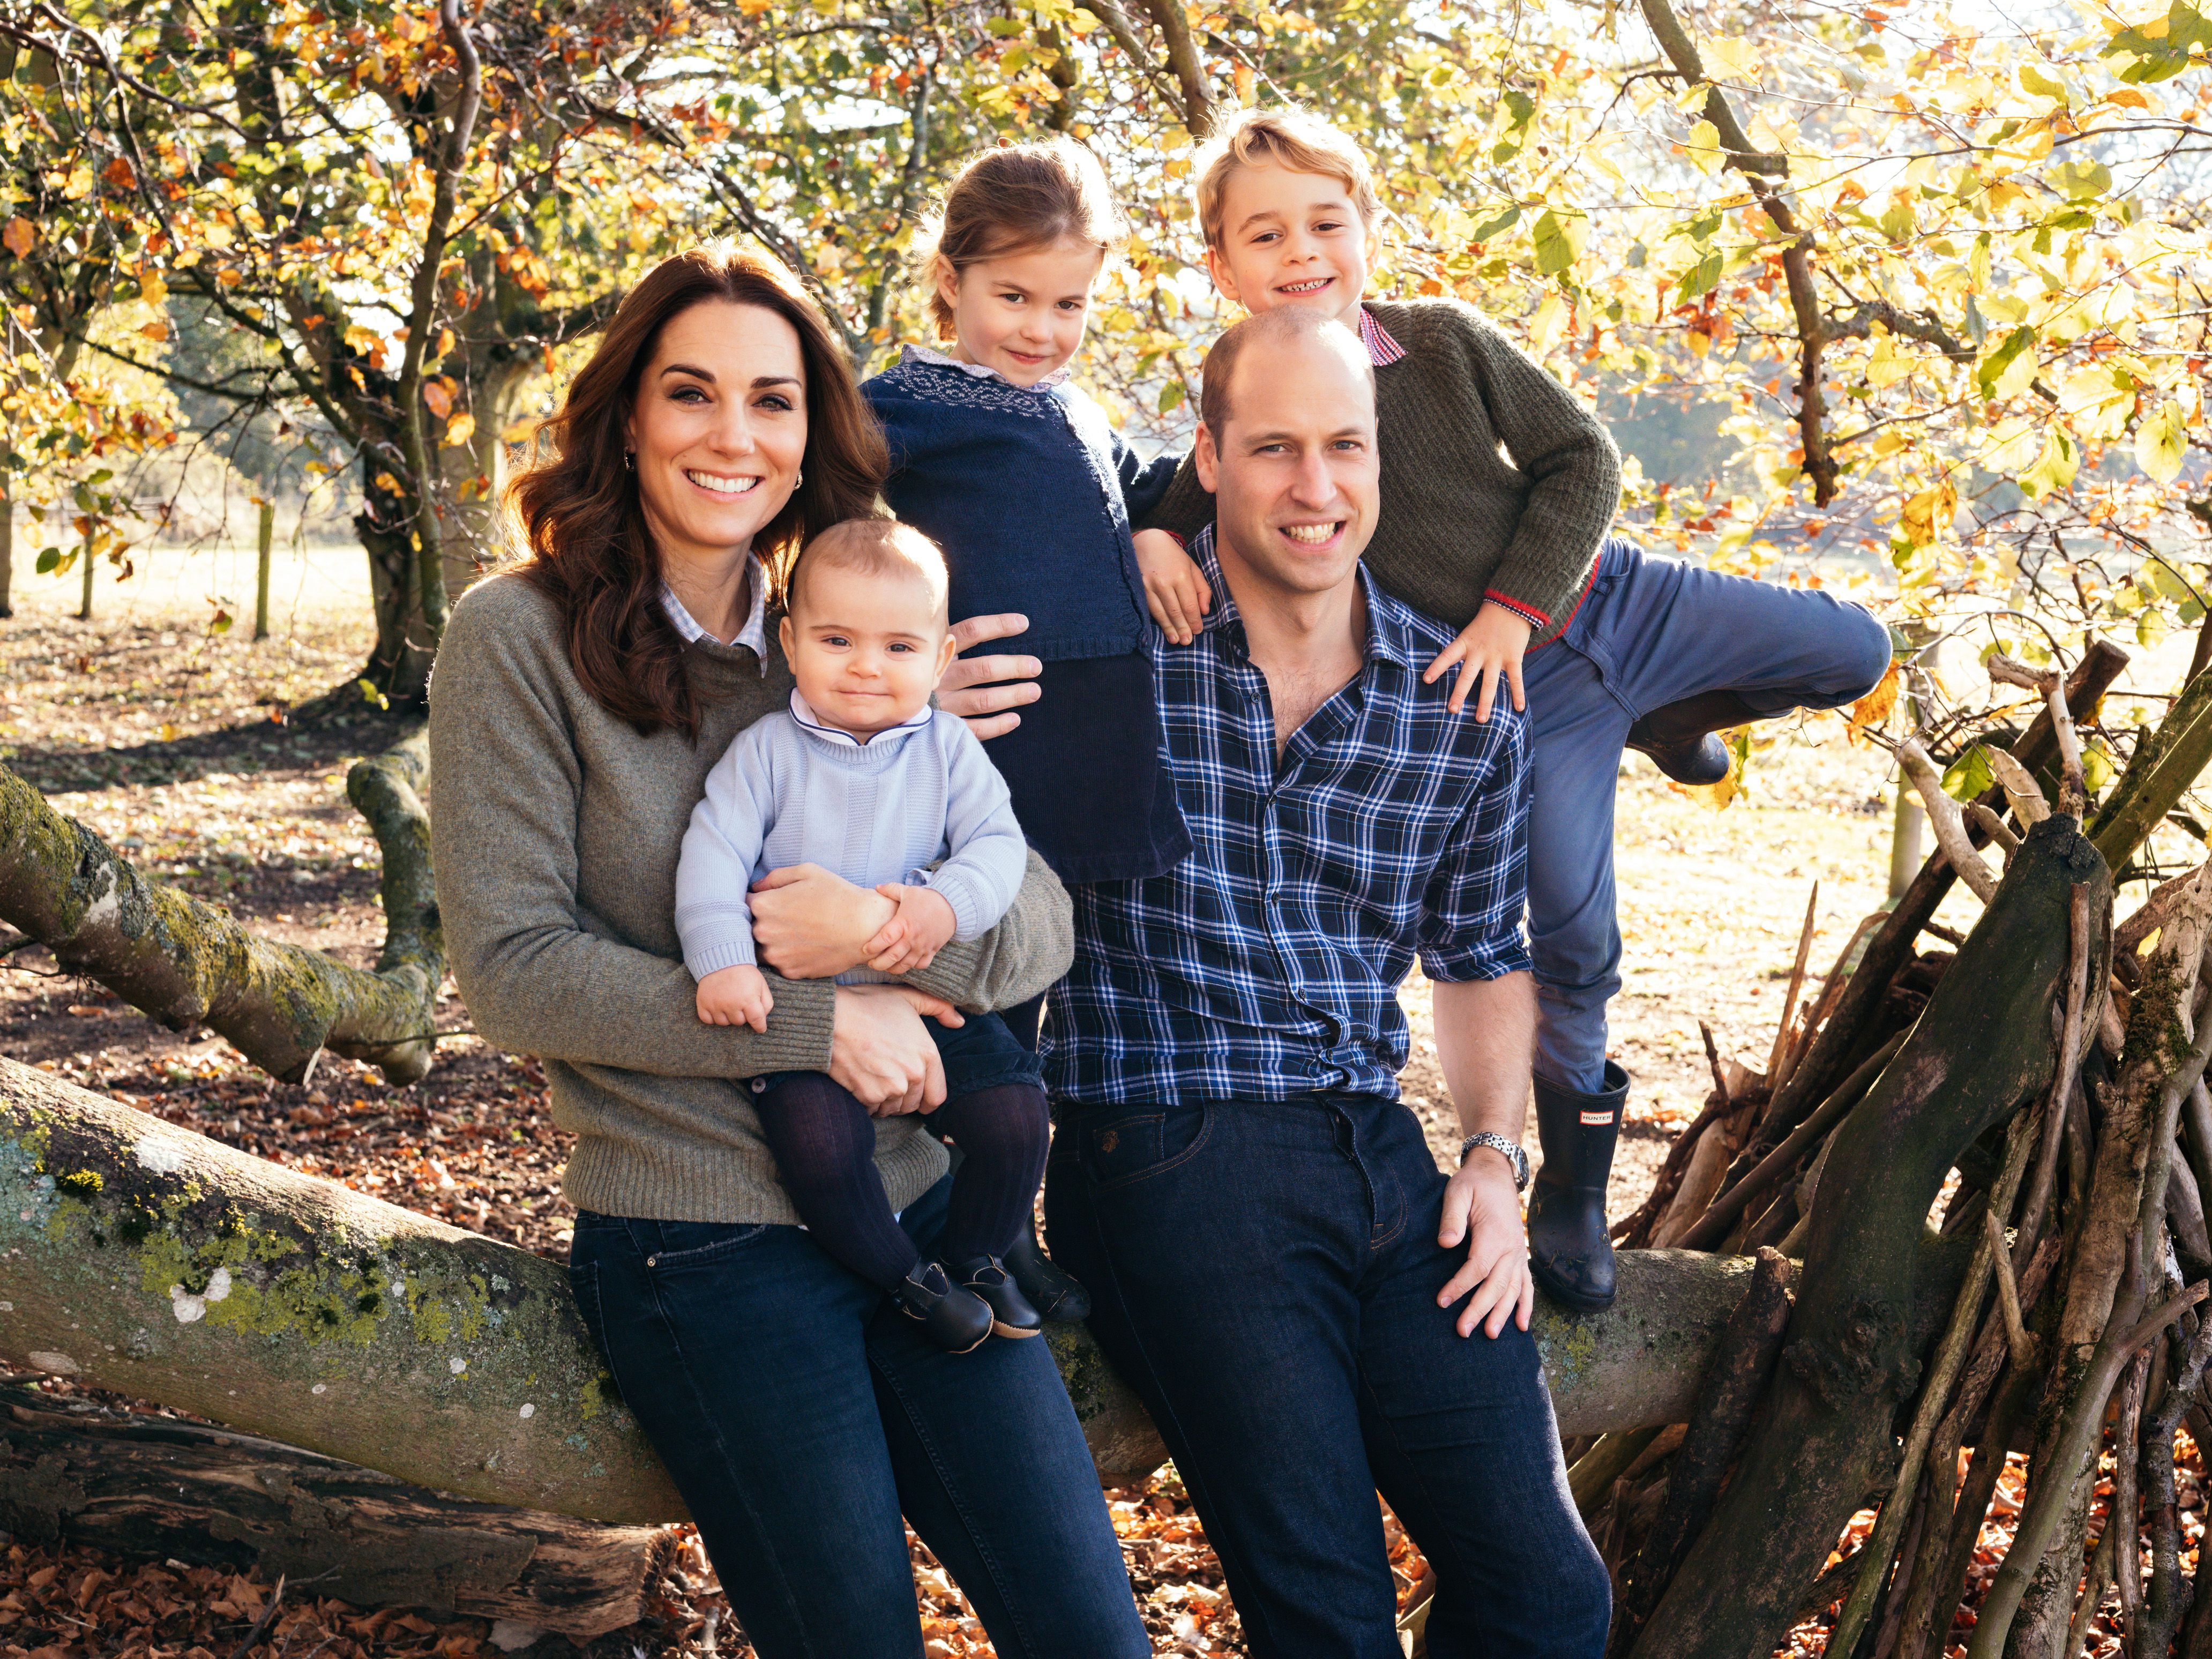 Prince William S Kids With Kate Middleton Meet Their Children